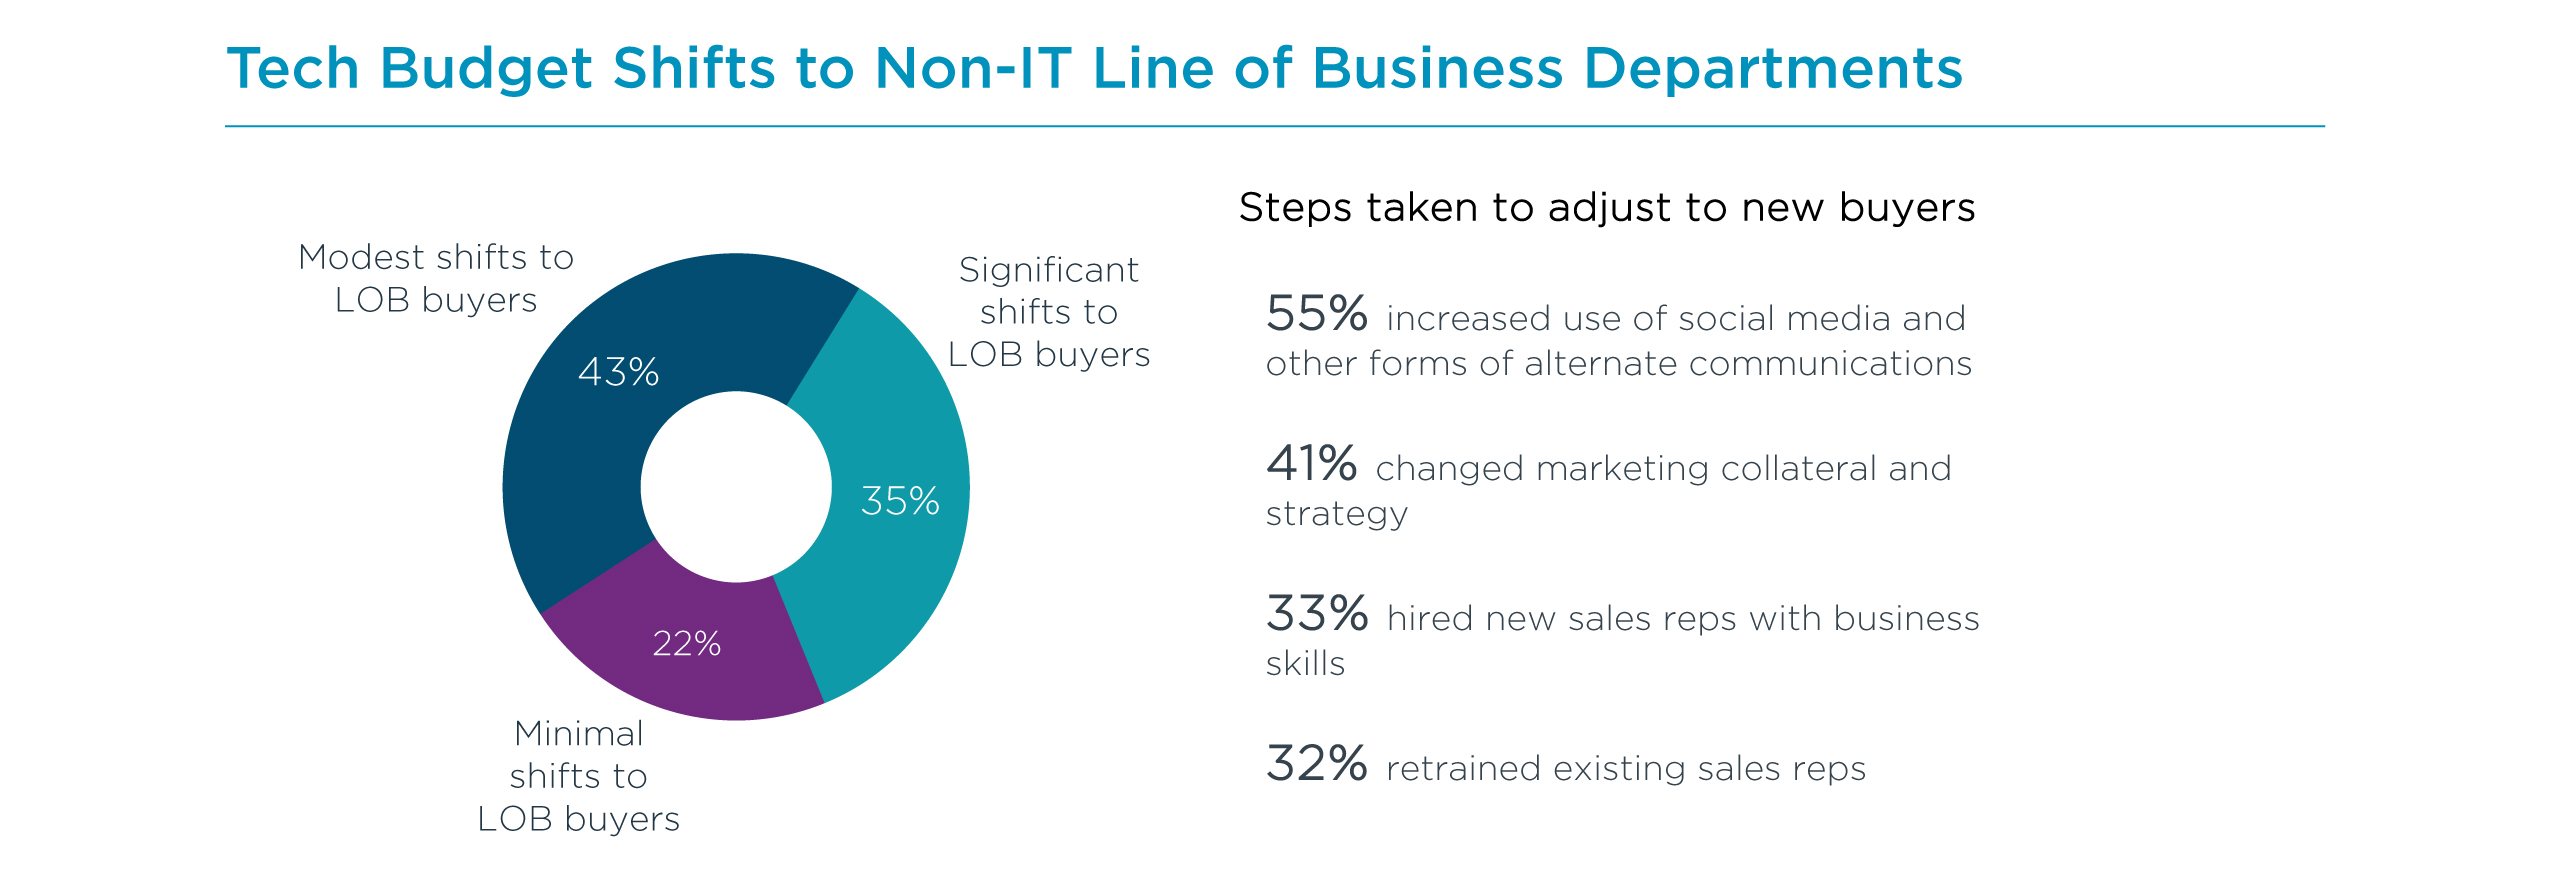 Tech Budget Shifts to Non-IT Line of Business Departments